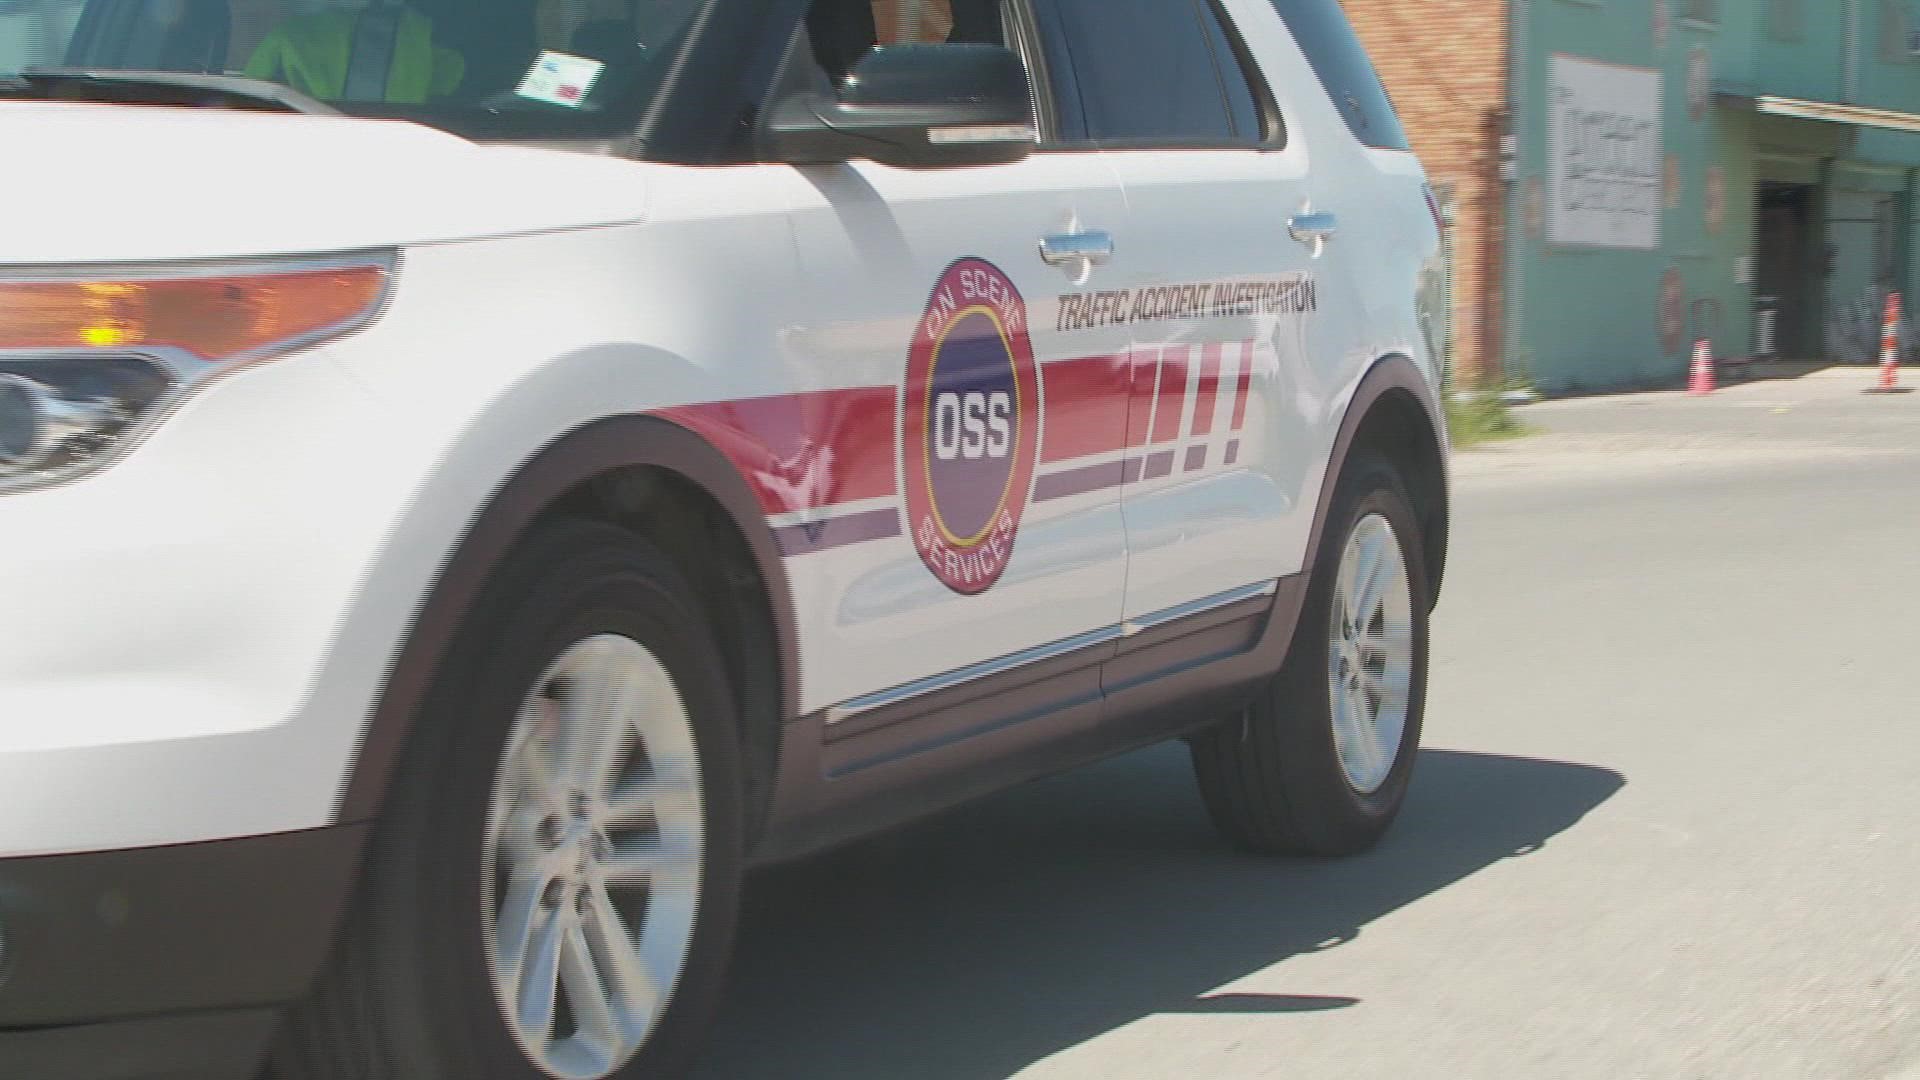 OSS is a company contracted through NOPD to respond to minor traffic accidents. They can take reports, but they leave writing citations to police.